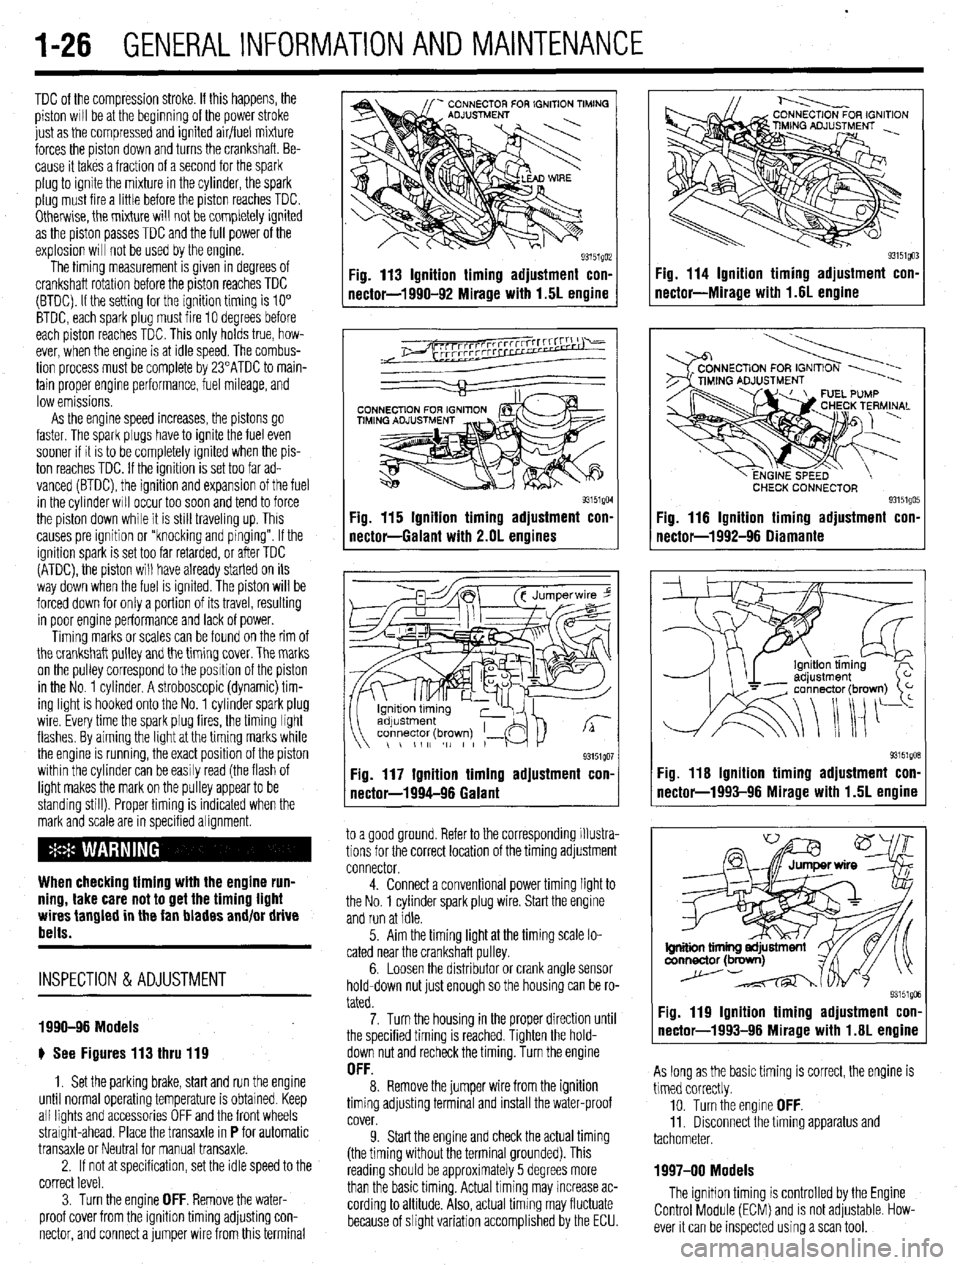 MITSUBISHI DIAMANTE 1900  Repair Manual . 
1-26 GENERALINFORMATIONAND MAINTENANCE 
TDC of the compression stroke. If this happens, the 
piston WIII be at the beginning of the power stroke 
just as the compressed and ignited air/fuel mixture